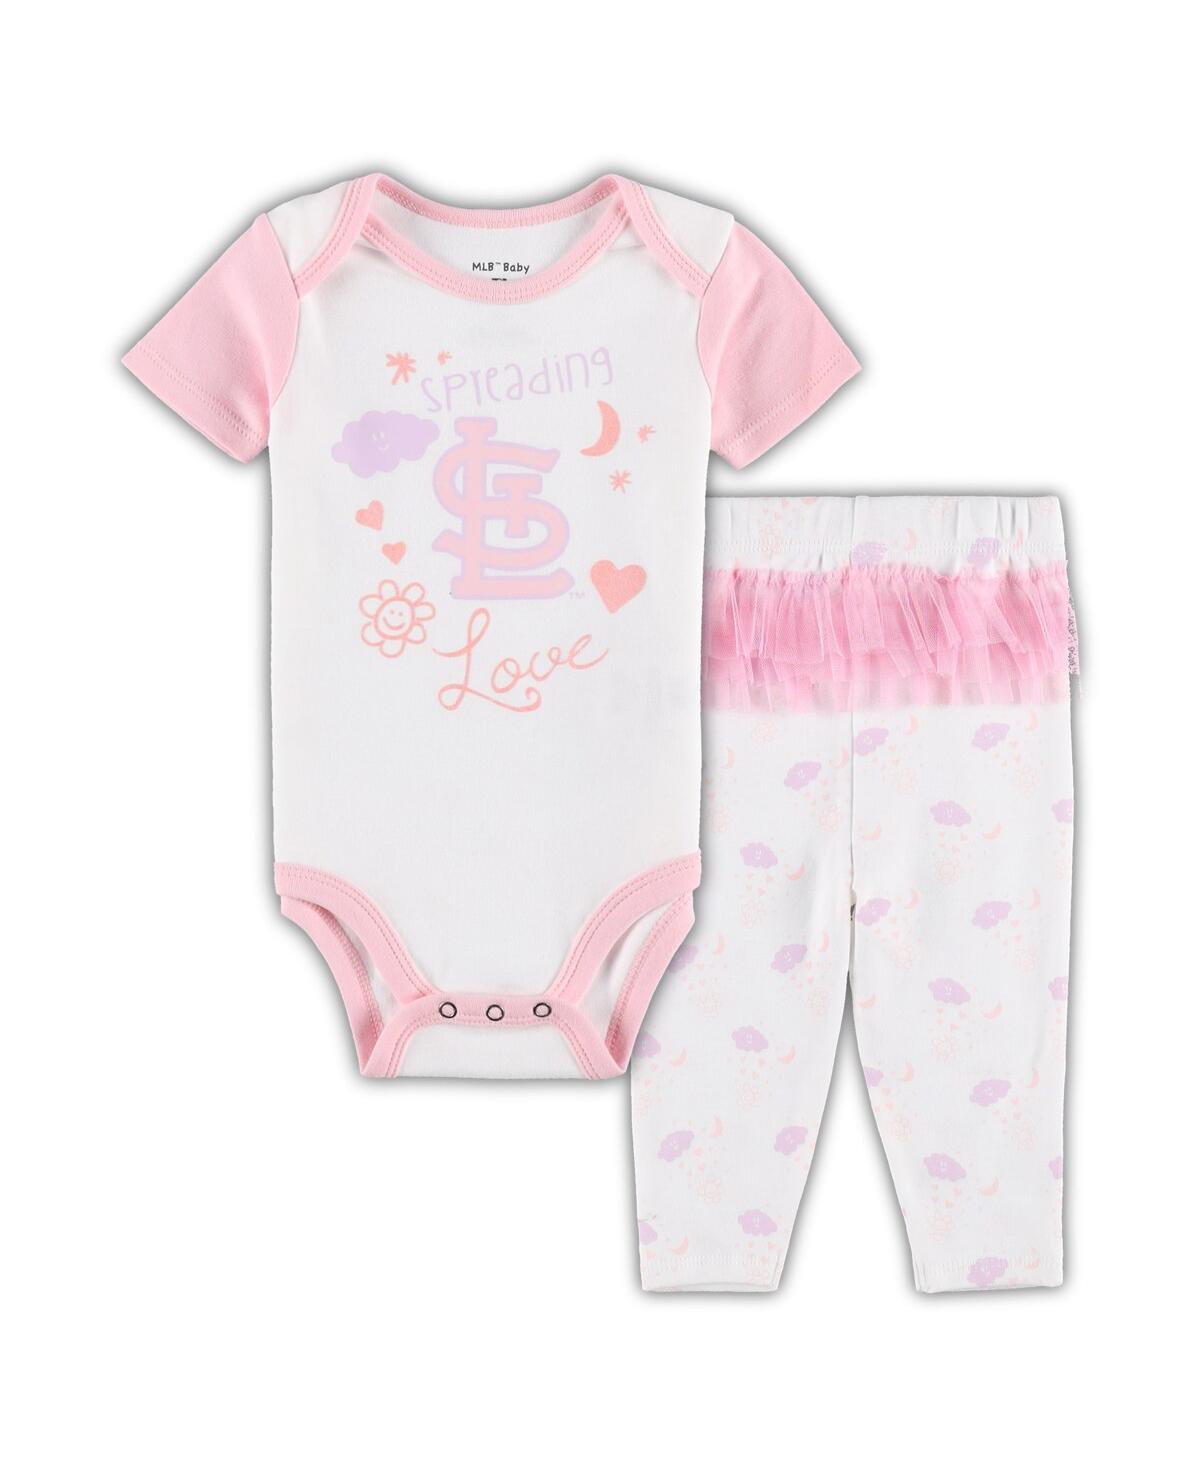 Outerstuff Babies' Newborn And Infant Boys And Girls White And Pink St. Louis Cardinals Spreading Love Bodysuit And Tut In White,pink